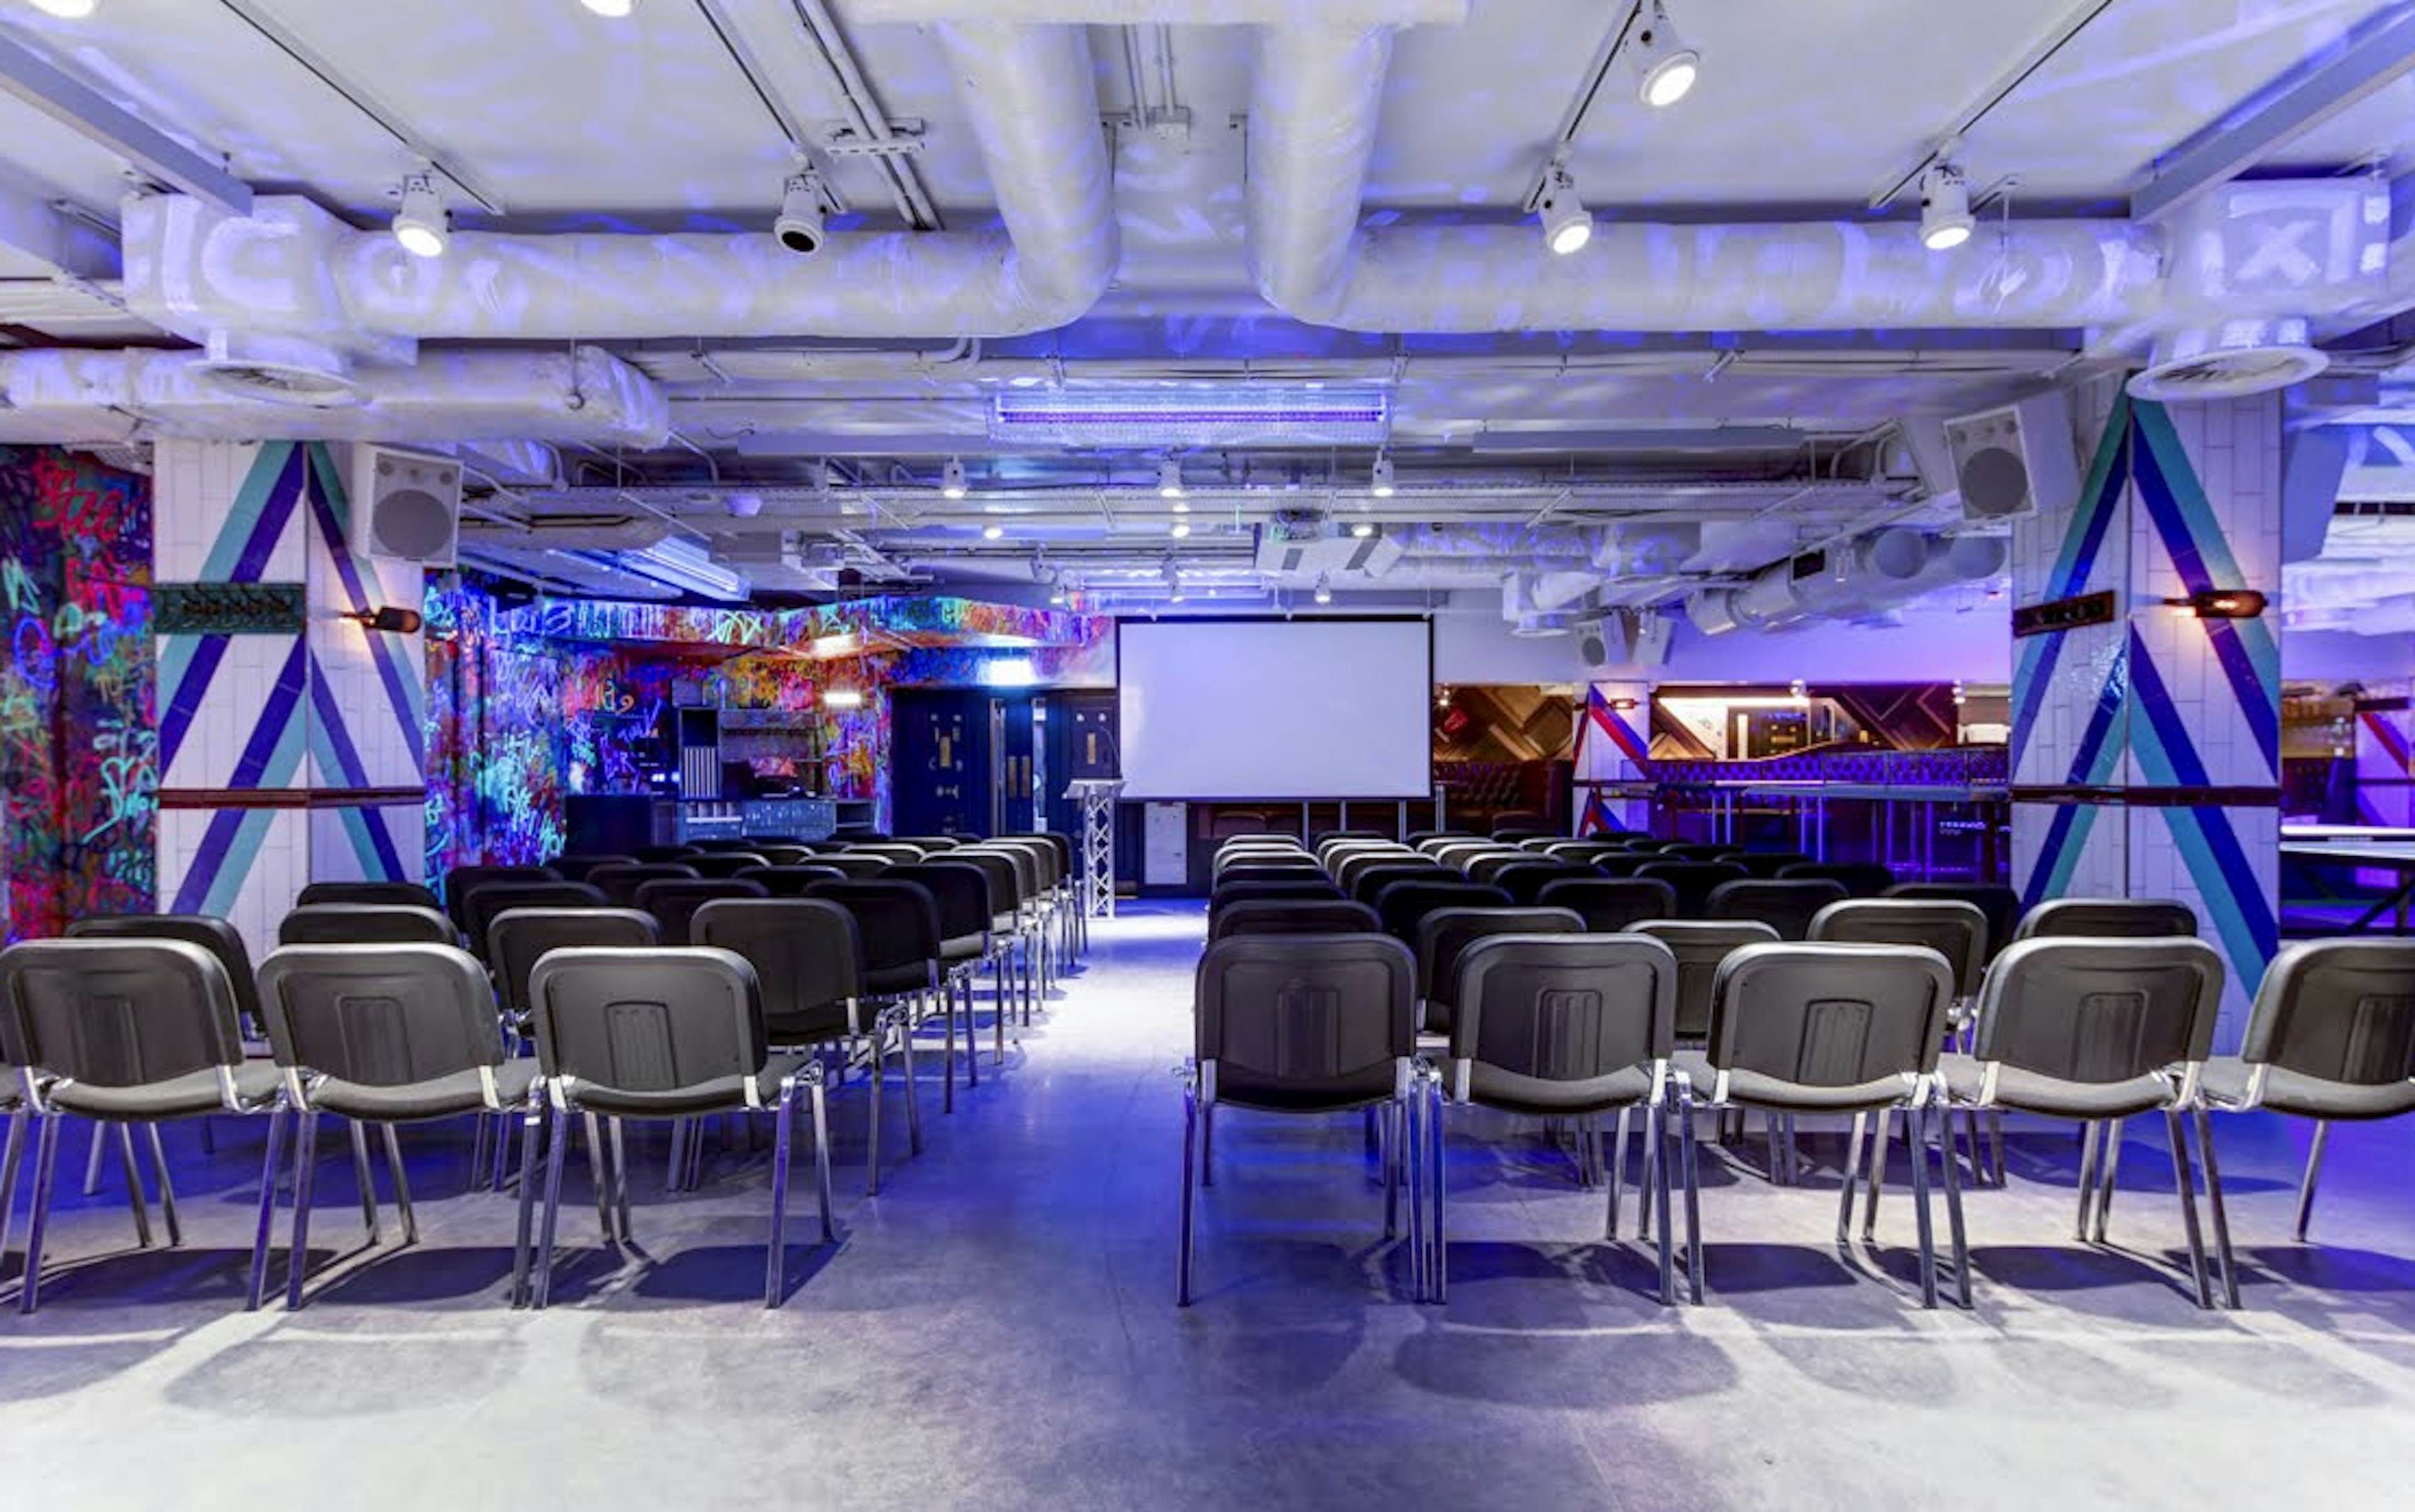 Bounce Old Street|Shoreditch - Conference Space image 1